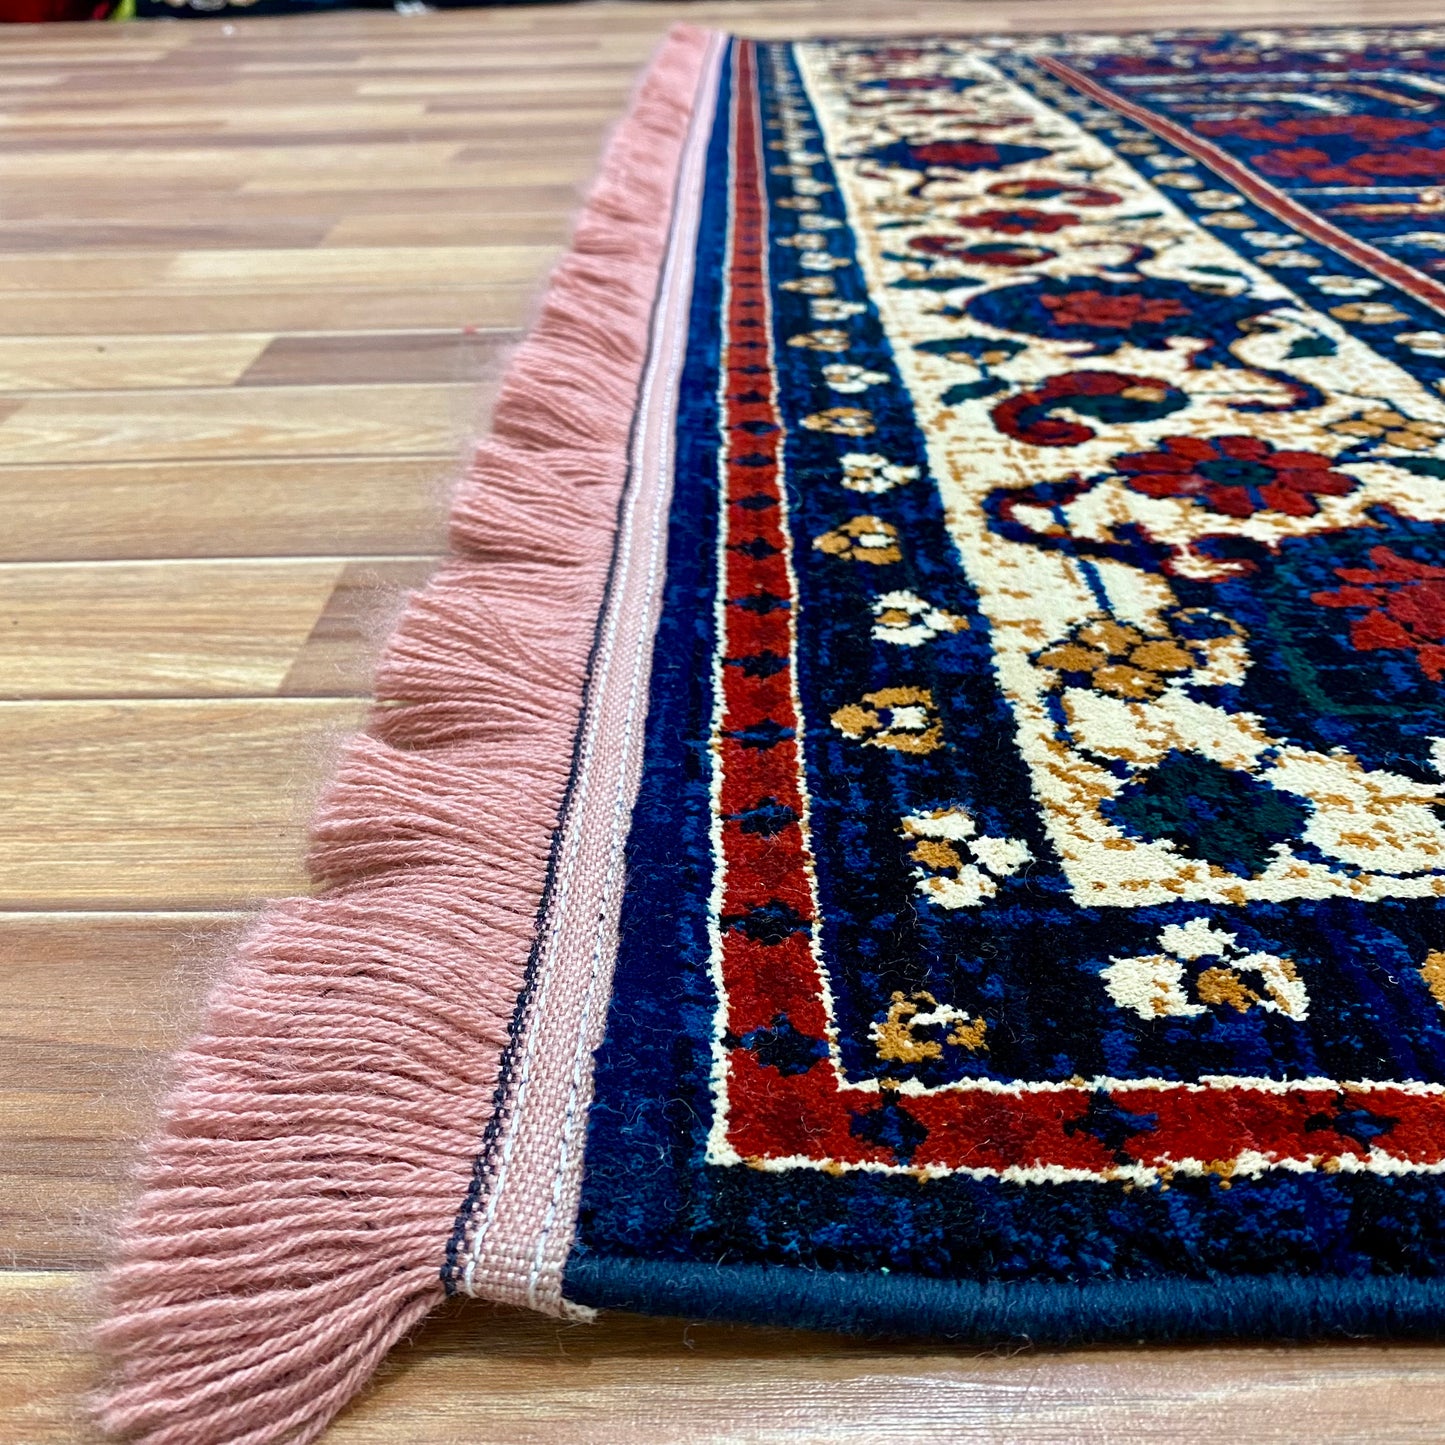 7 ft x 10 ft - Area Rug - Persian Baluchi 1 - Blue and Beige - Timeless Beauty for Your Home